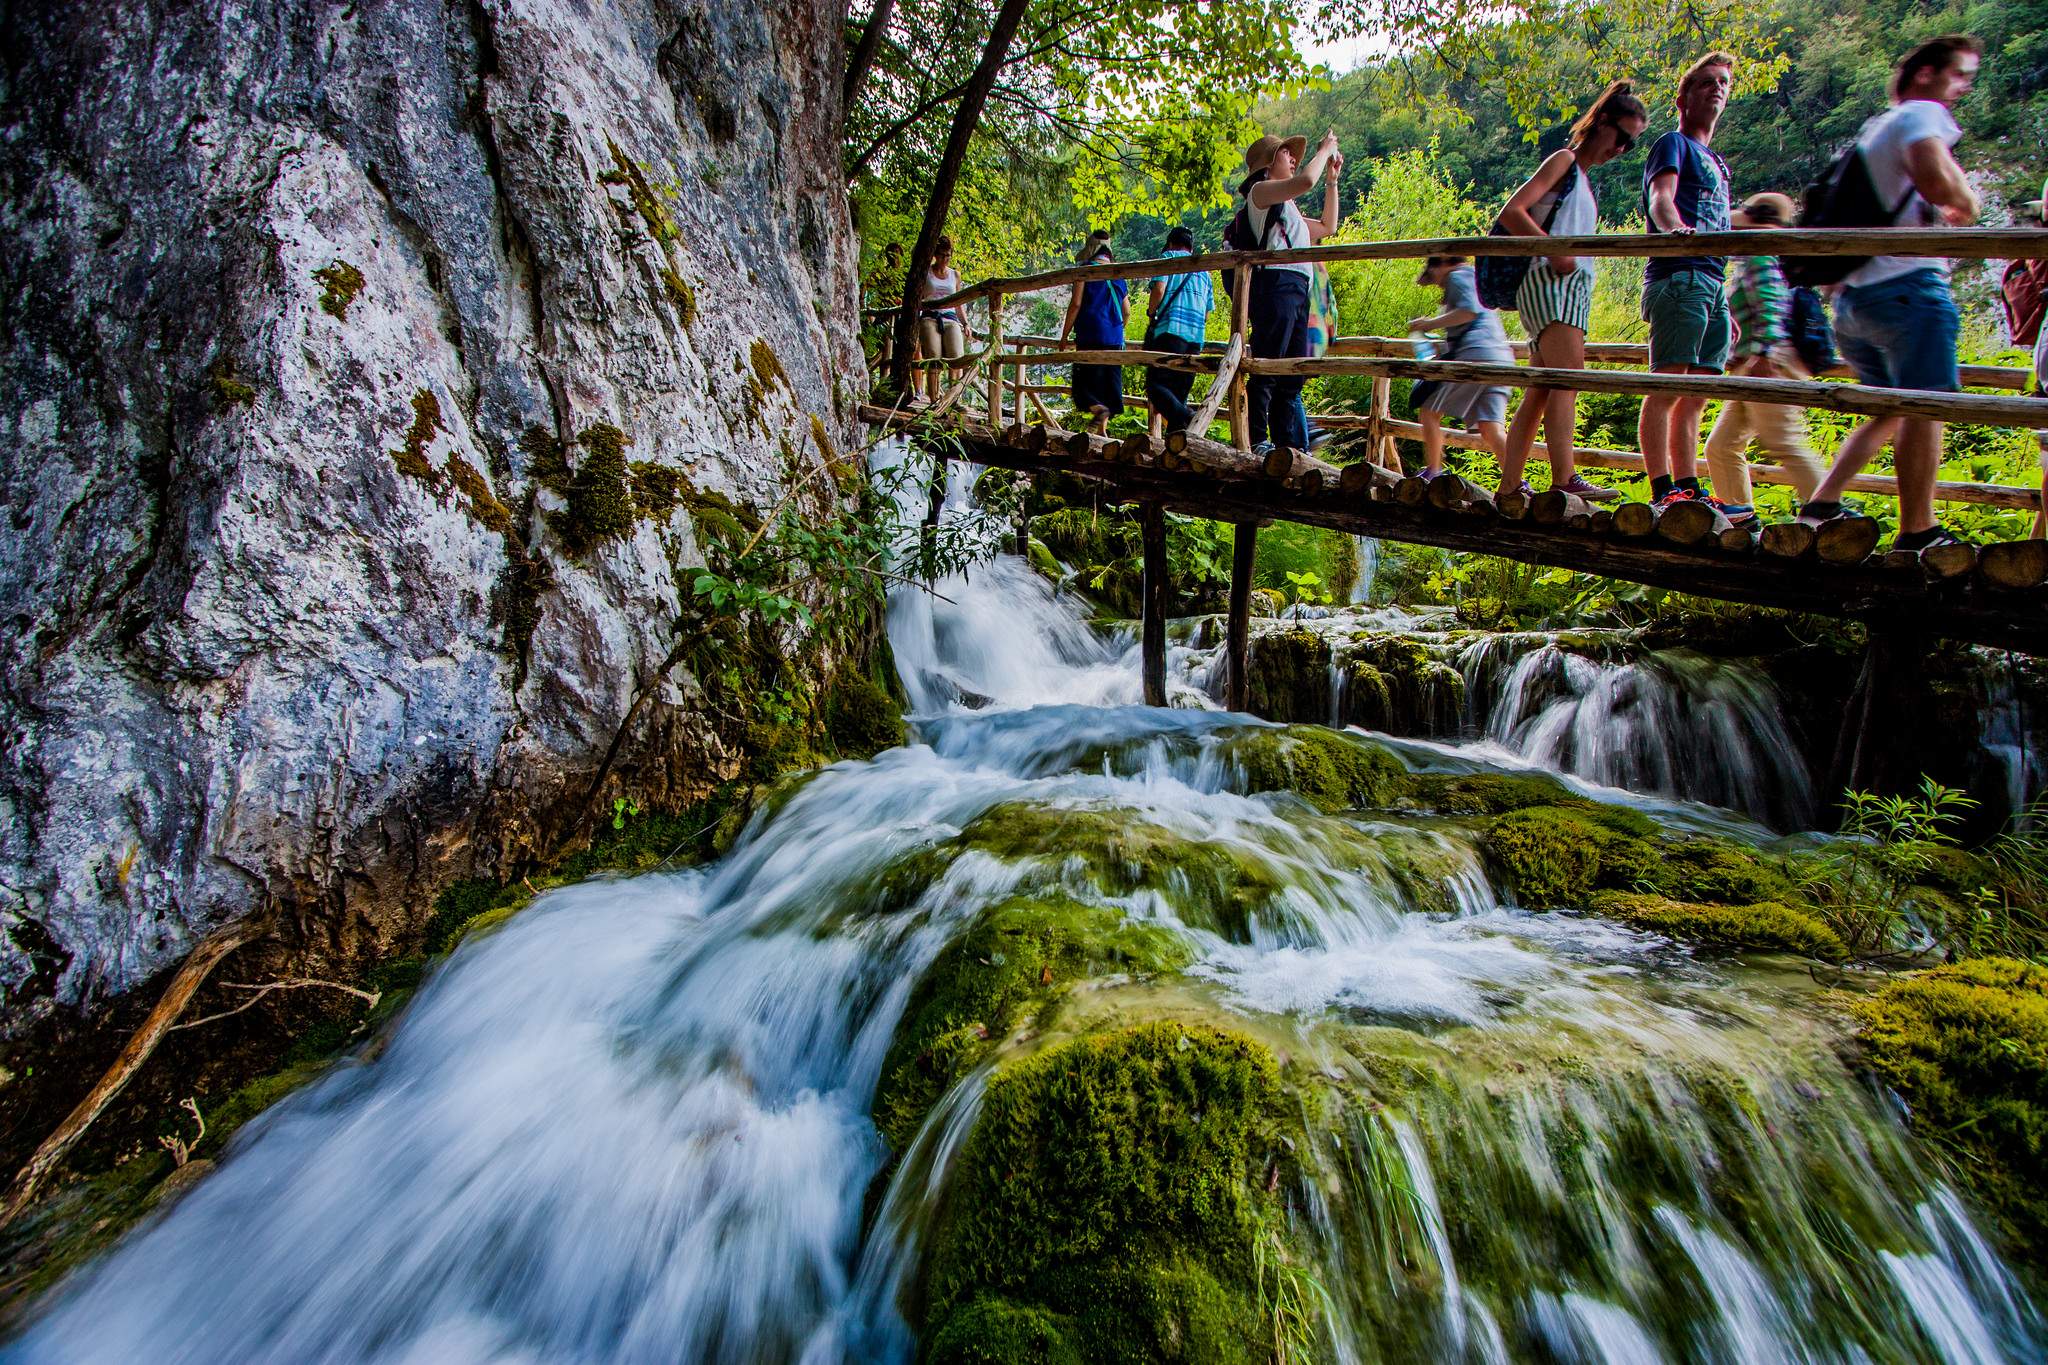 Paths could be crowded sometimes, but we just didn't care about that - Plitvice Lakes